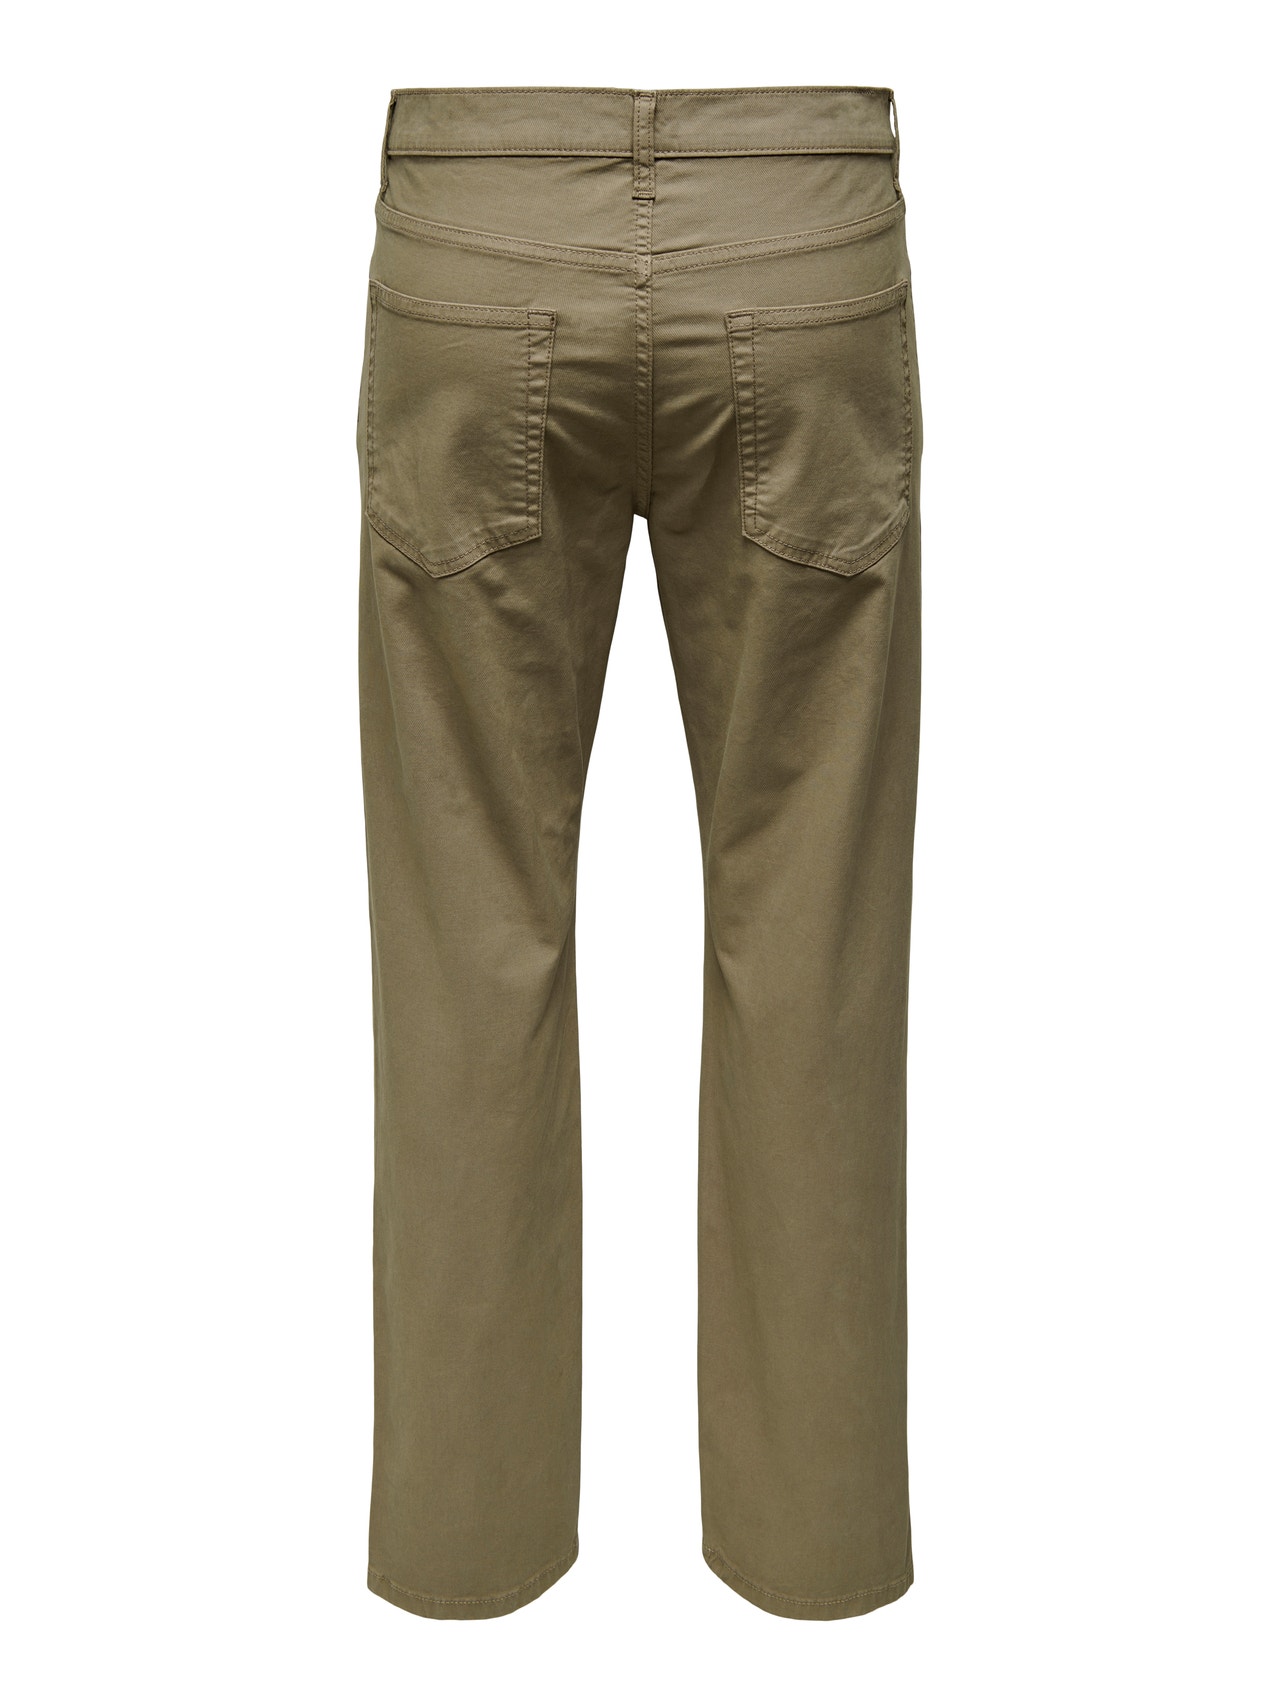 ONLY & SONS ONSEDGE LOOSE 3511 PANT -Caribou - 22023511